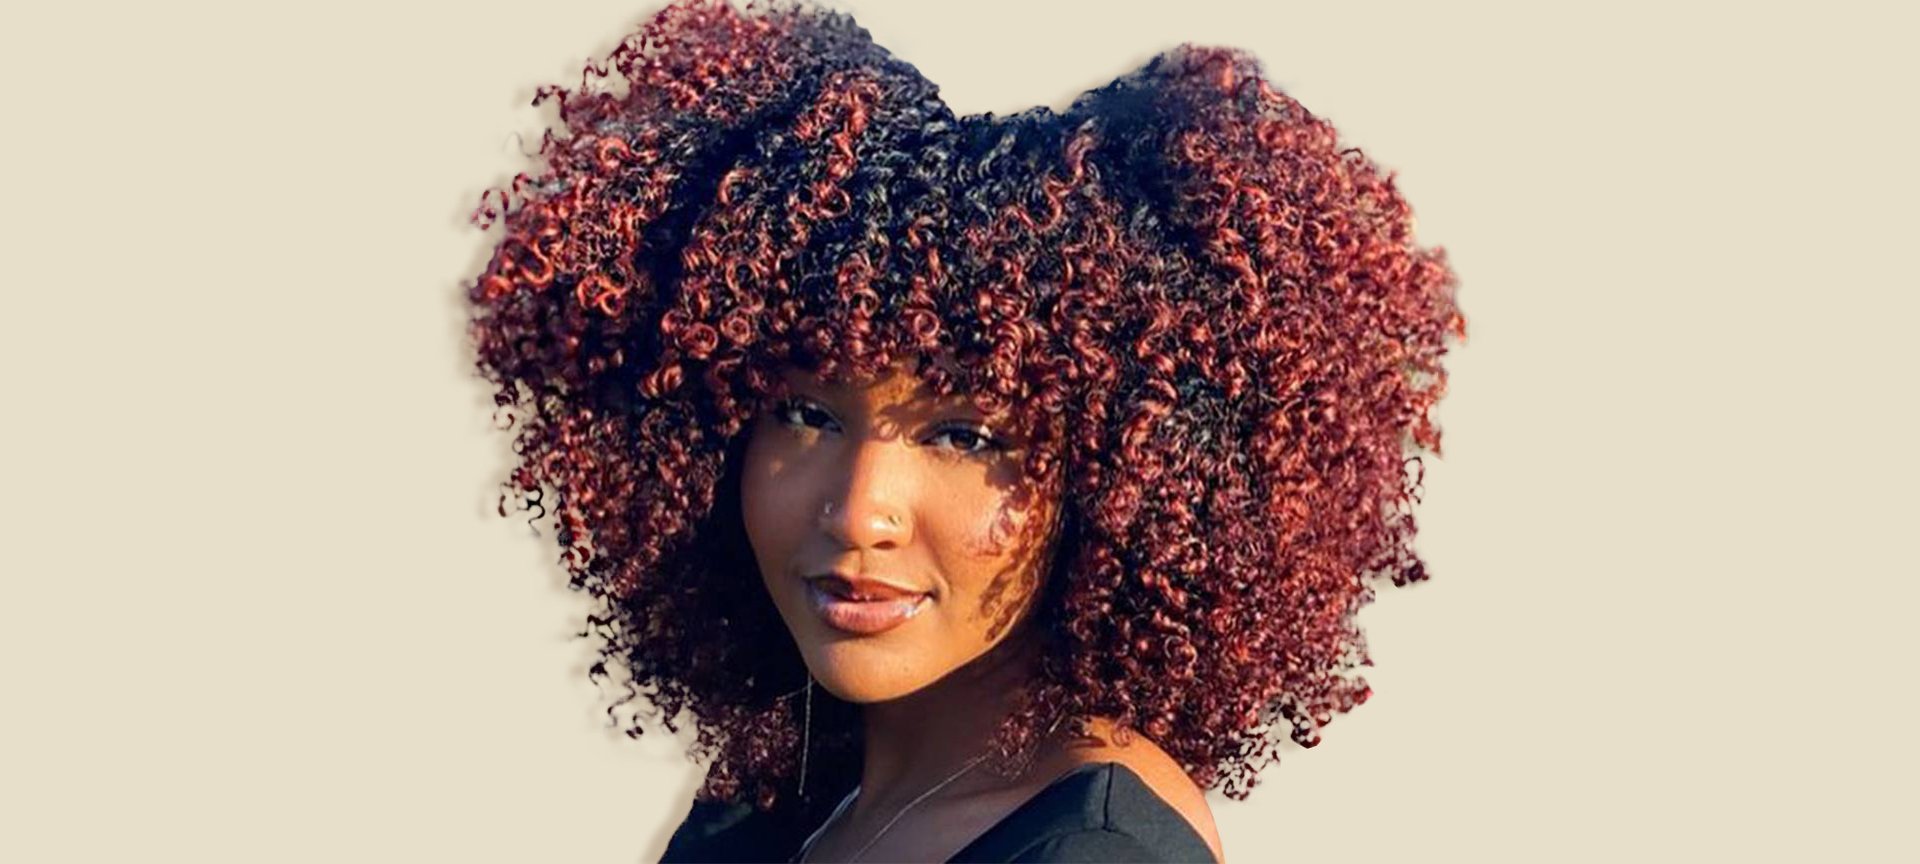 37 Trending Curly Hairstyles for Women to Try in 2023